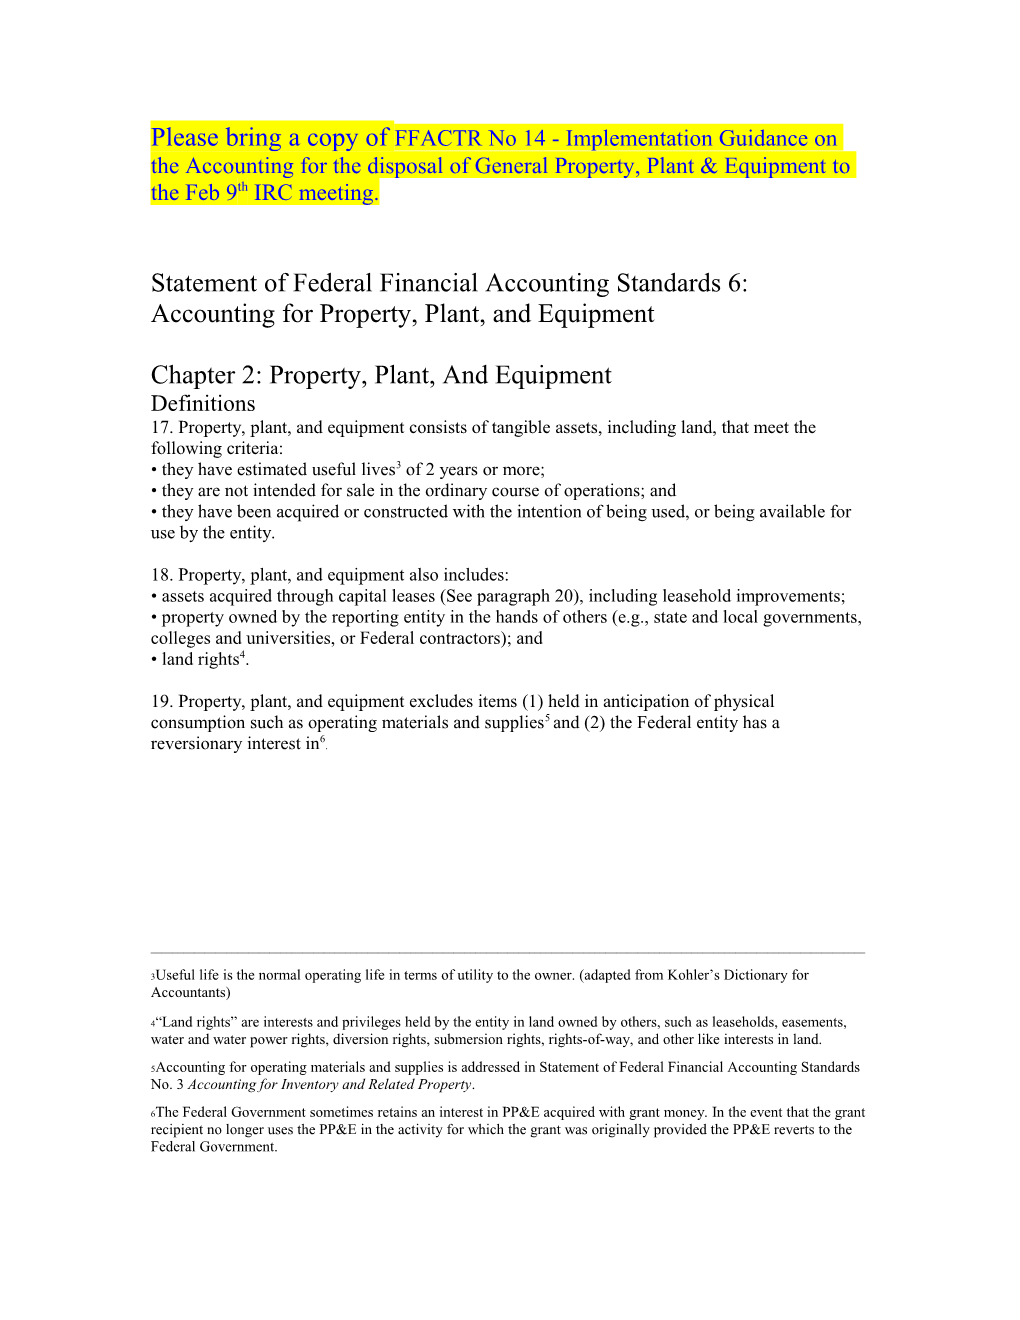 Statement of Federal Financial Accounting Standards 6